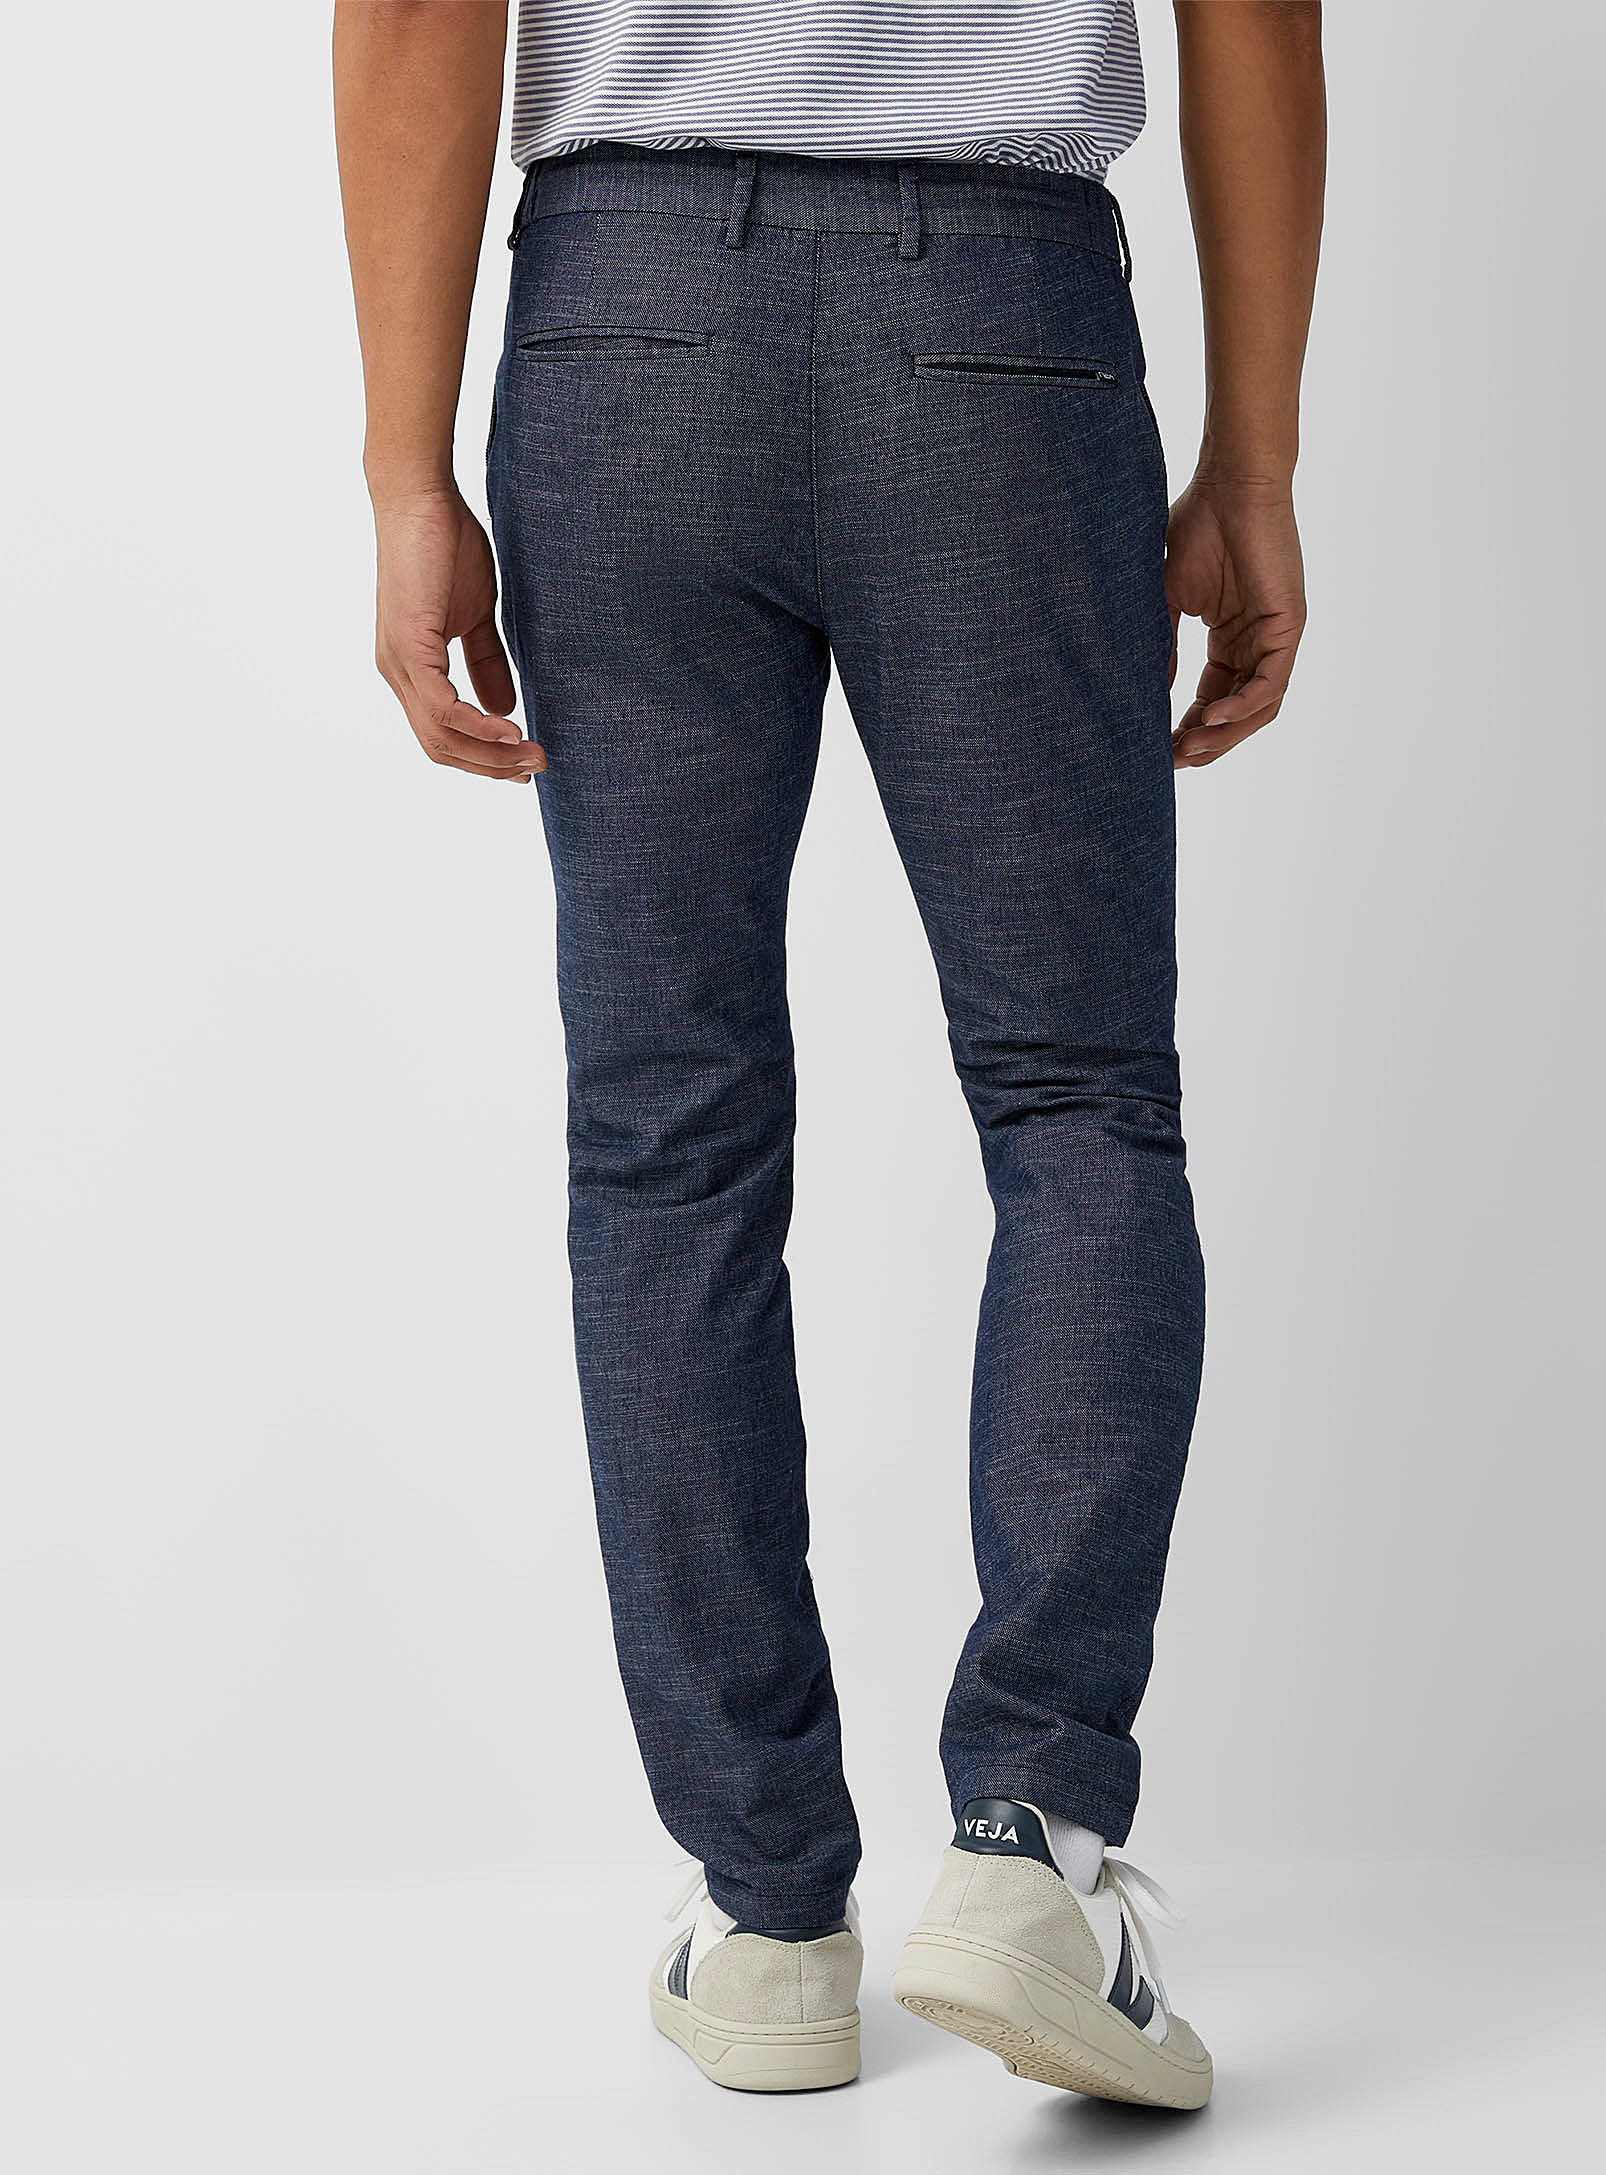 New Zealand Auckland - Le pantalon chambray taille confort